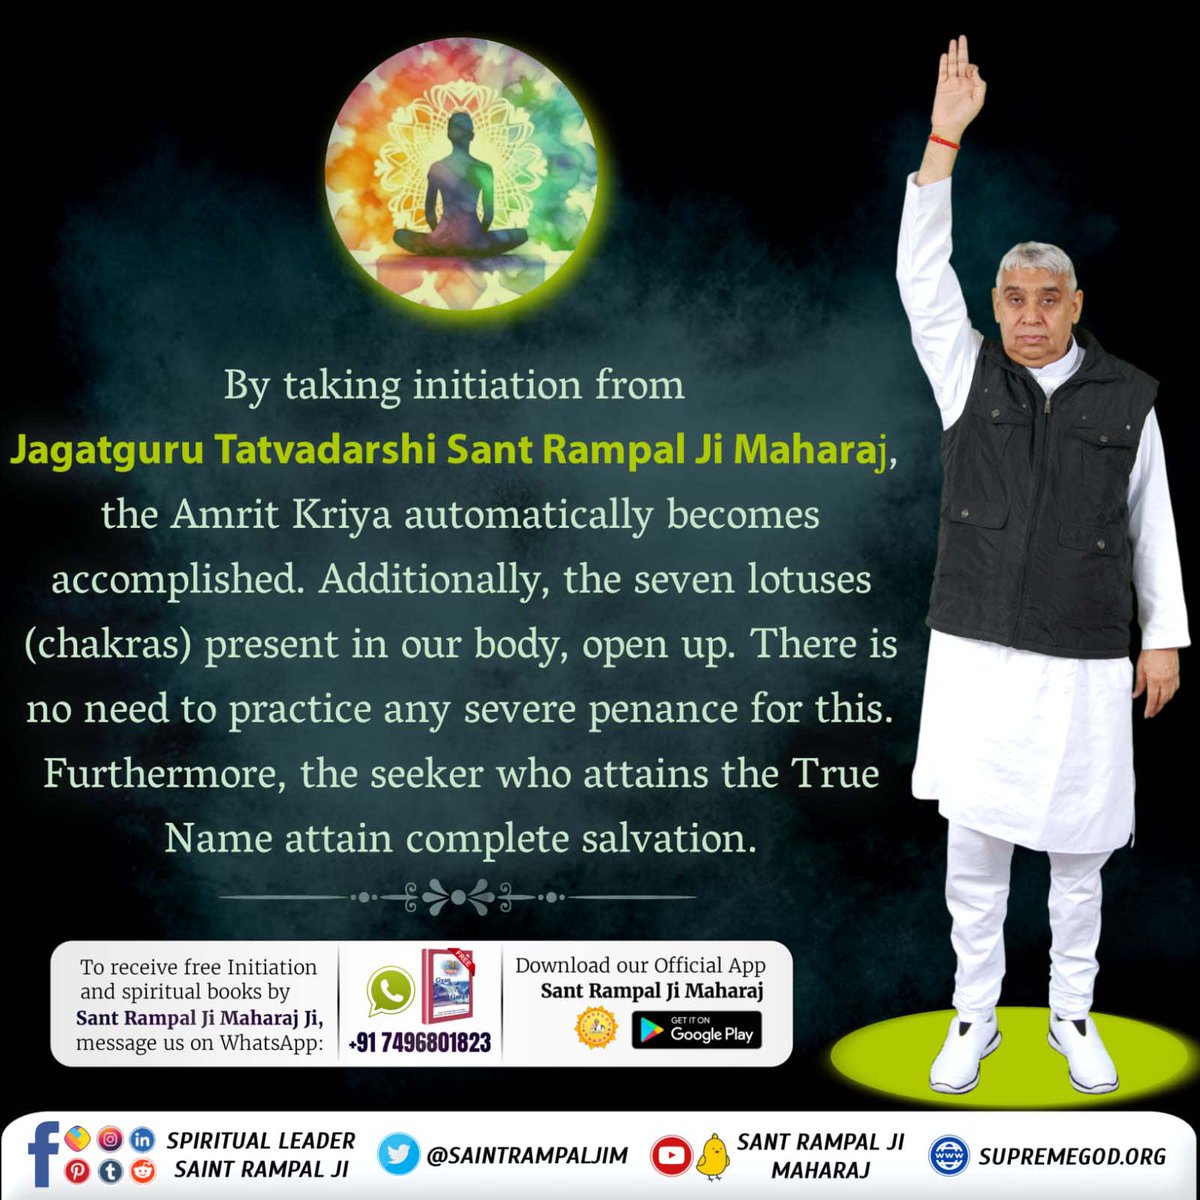 #What_Is_Meditation
By taking initiation from Jagatguru Tatvadarshi Sant Rampal Ji Maharaj, the Amrit Kriya automatically becomes accomplished. Additionally, the seven lotuses (chakras) present in our body, open up. There is no need to practice any severe penance for this.